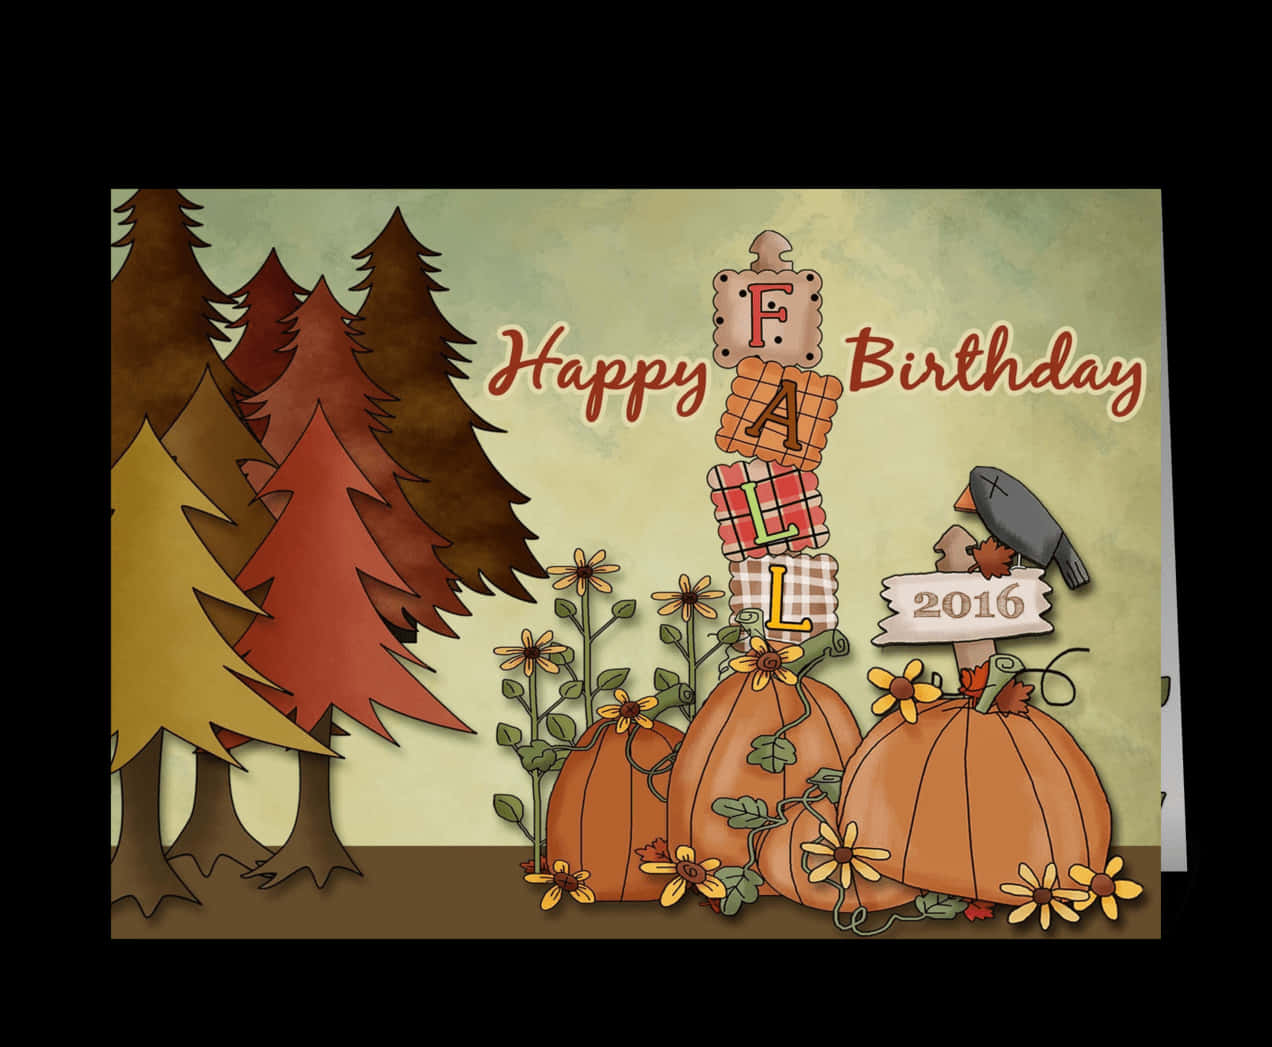 Happy Birthday Card With Pumpkins And A Bird Wallpaper